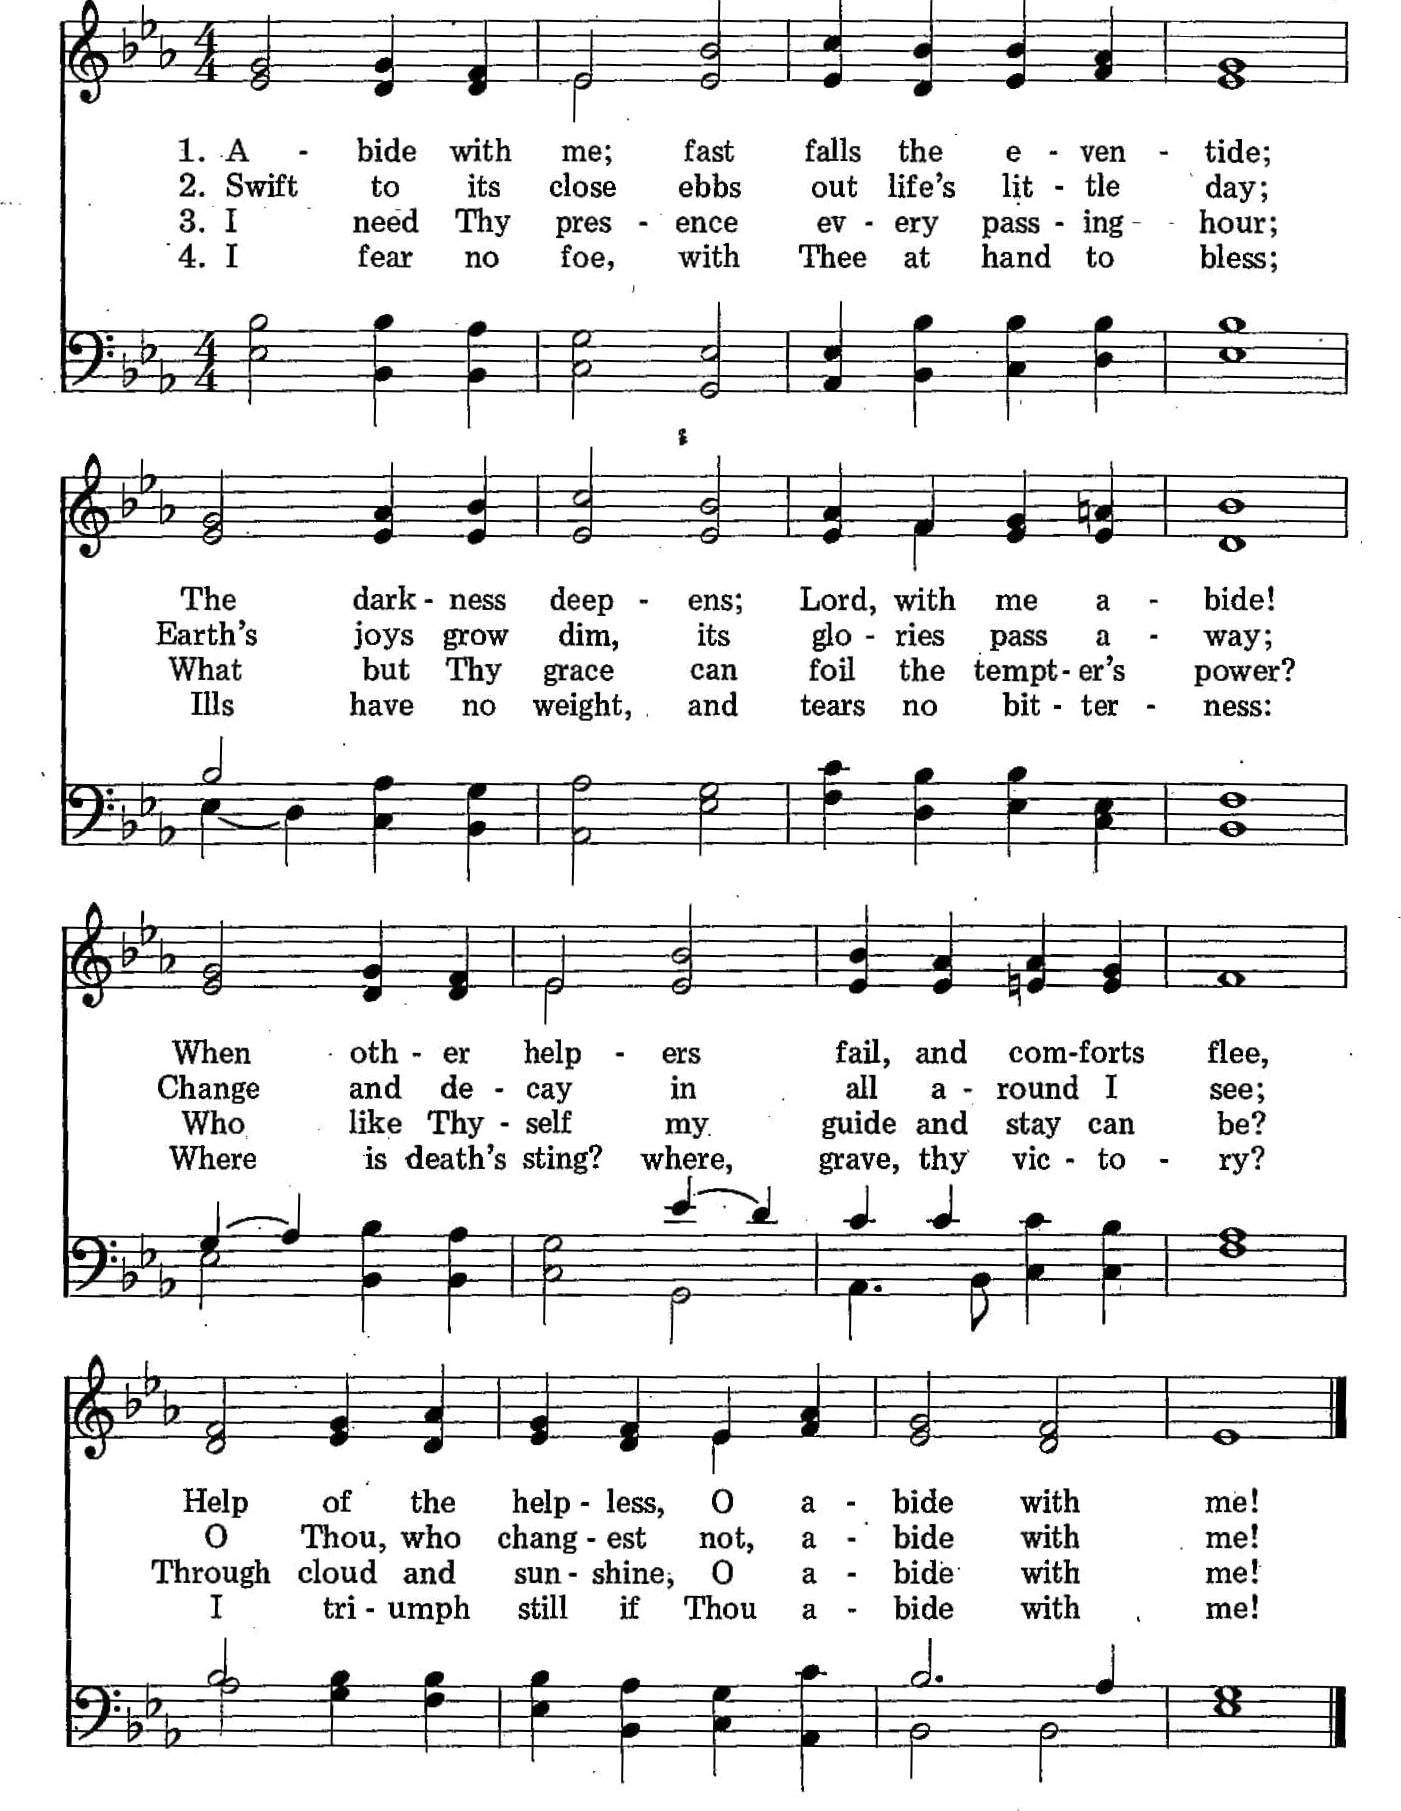 050 – Abide With Me sheet music